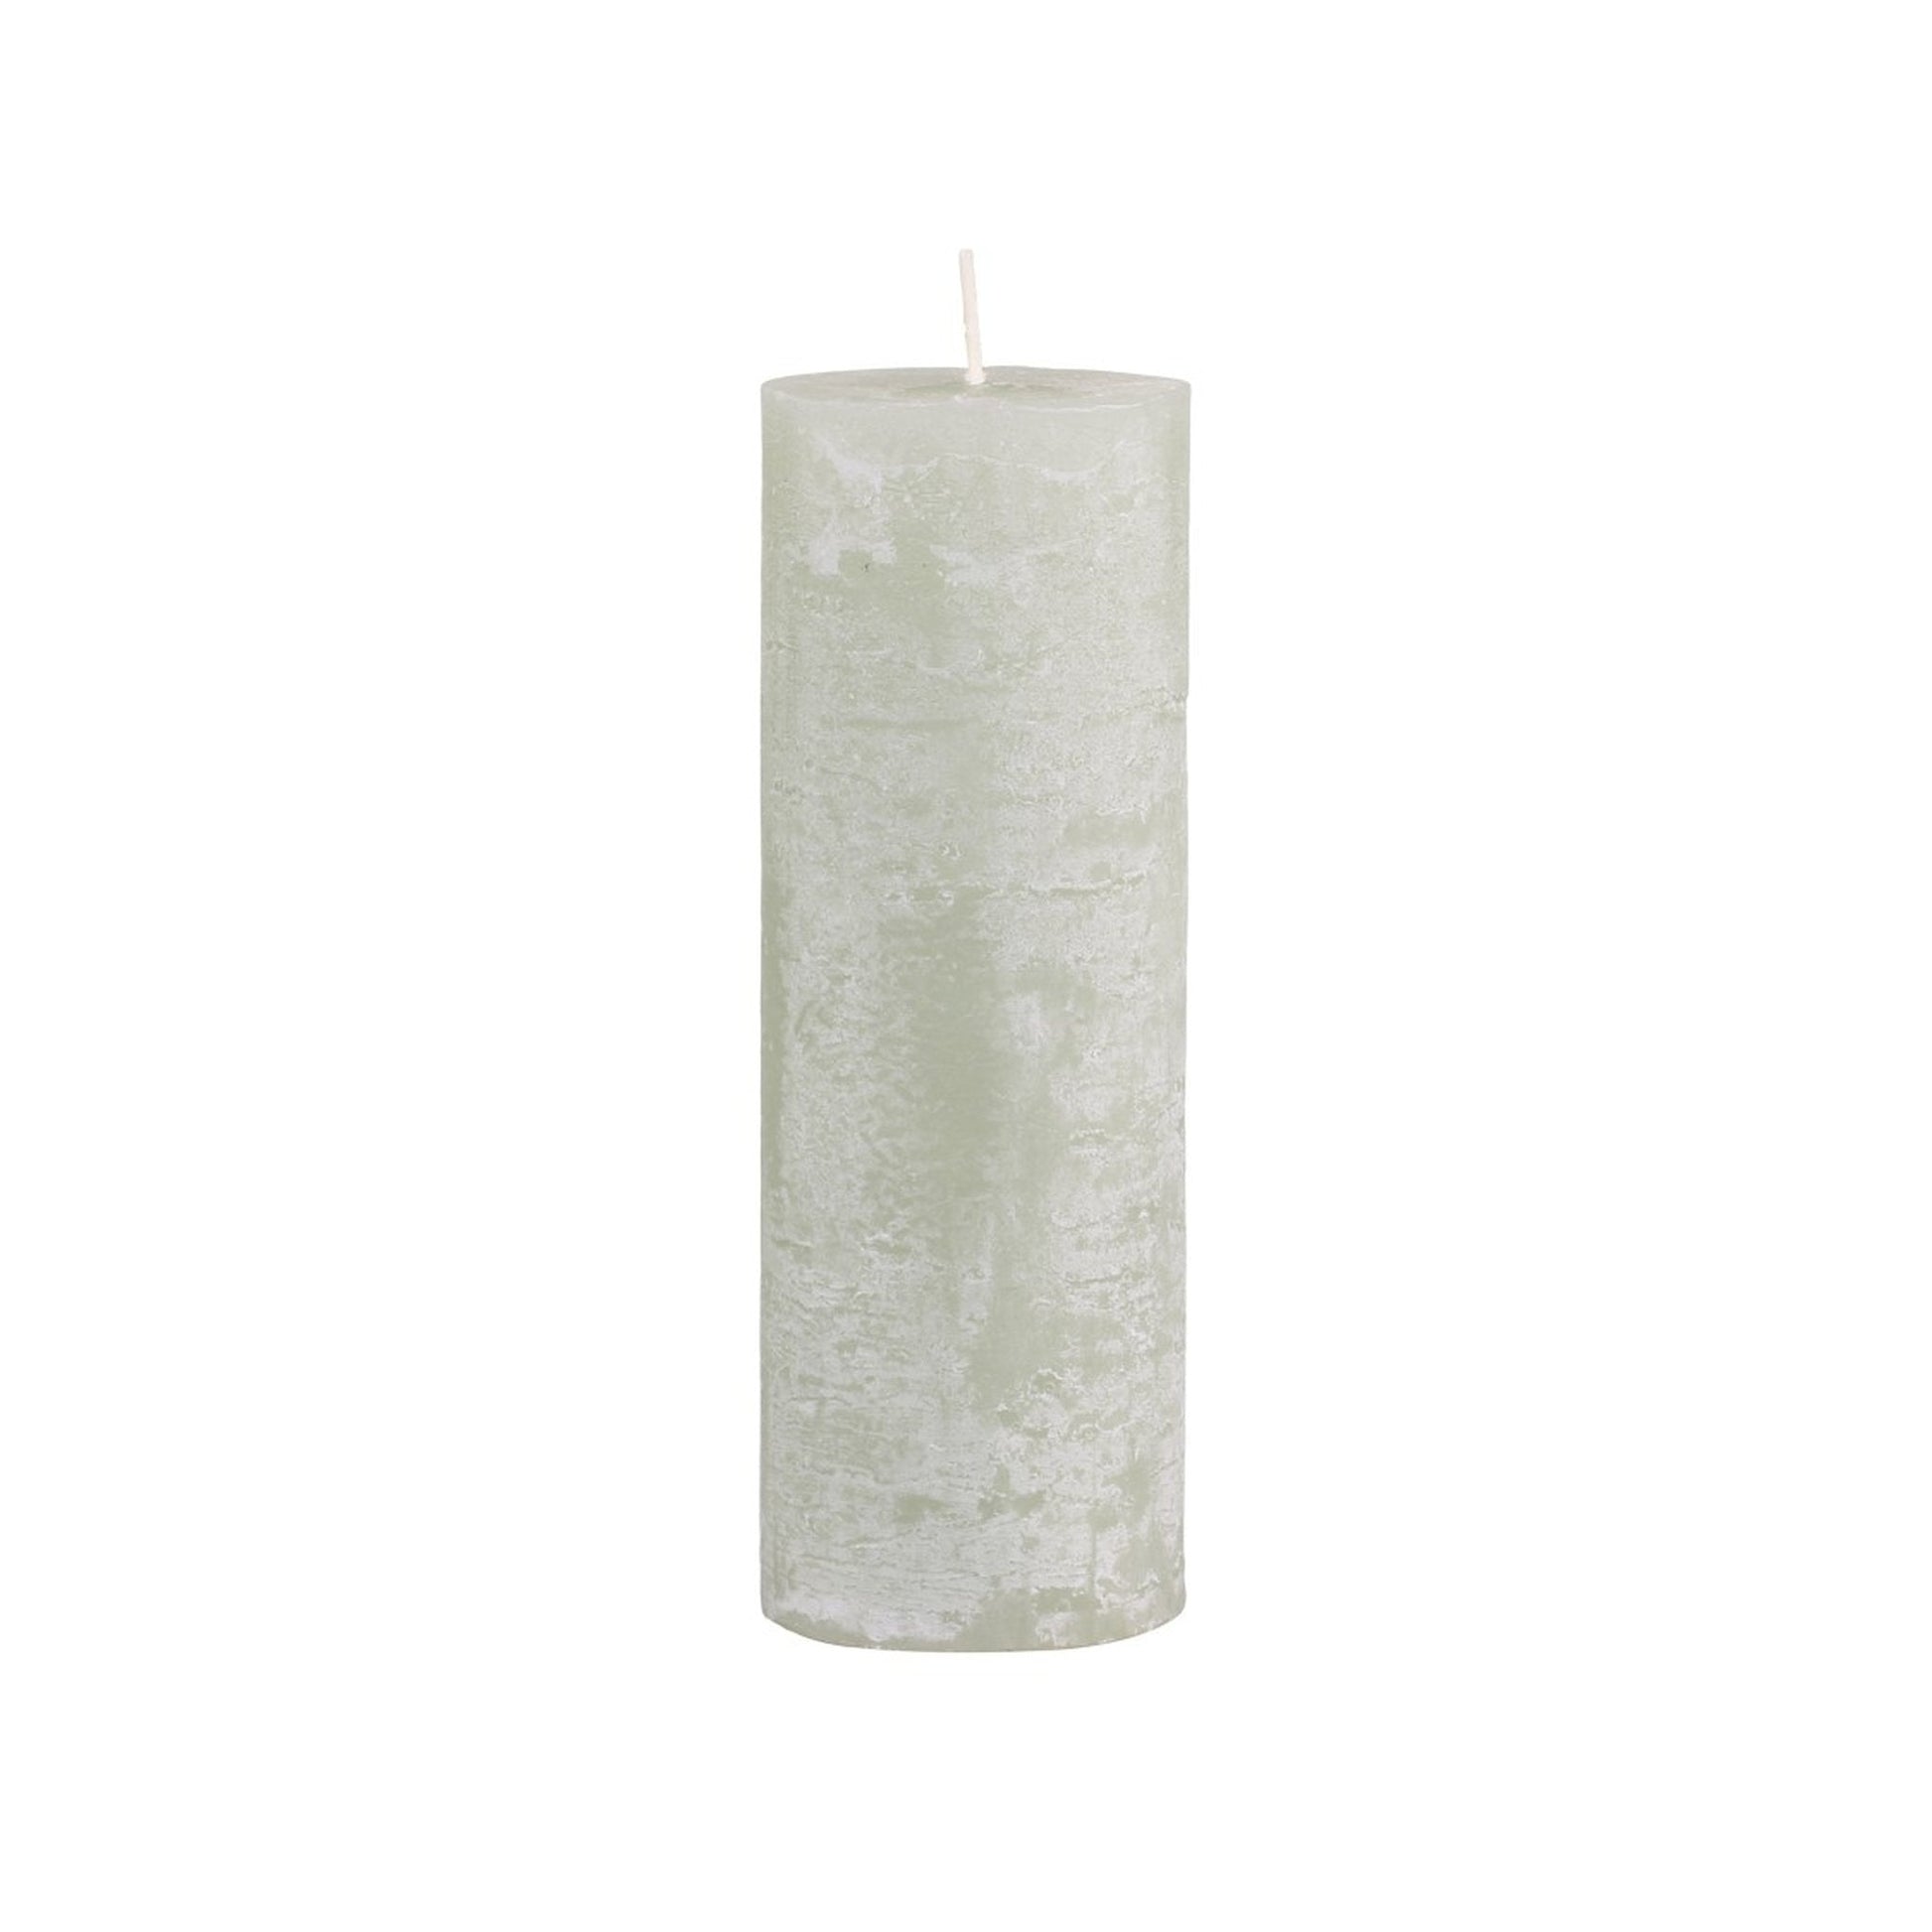 Verte Rustic Pillar Candle 80 hours - Bumble Living